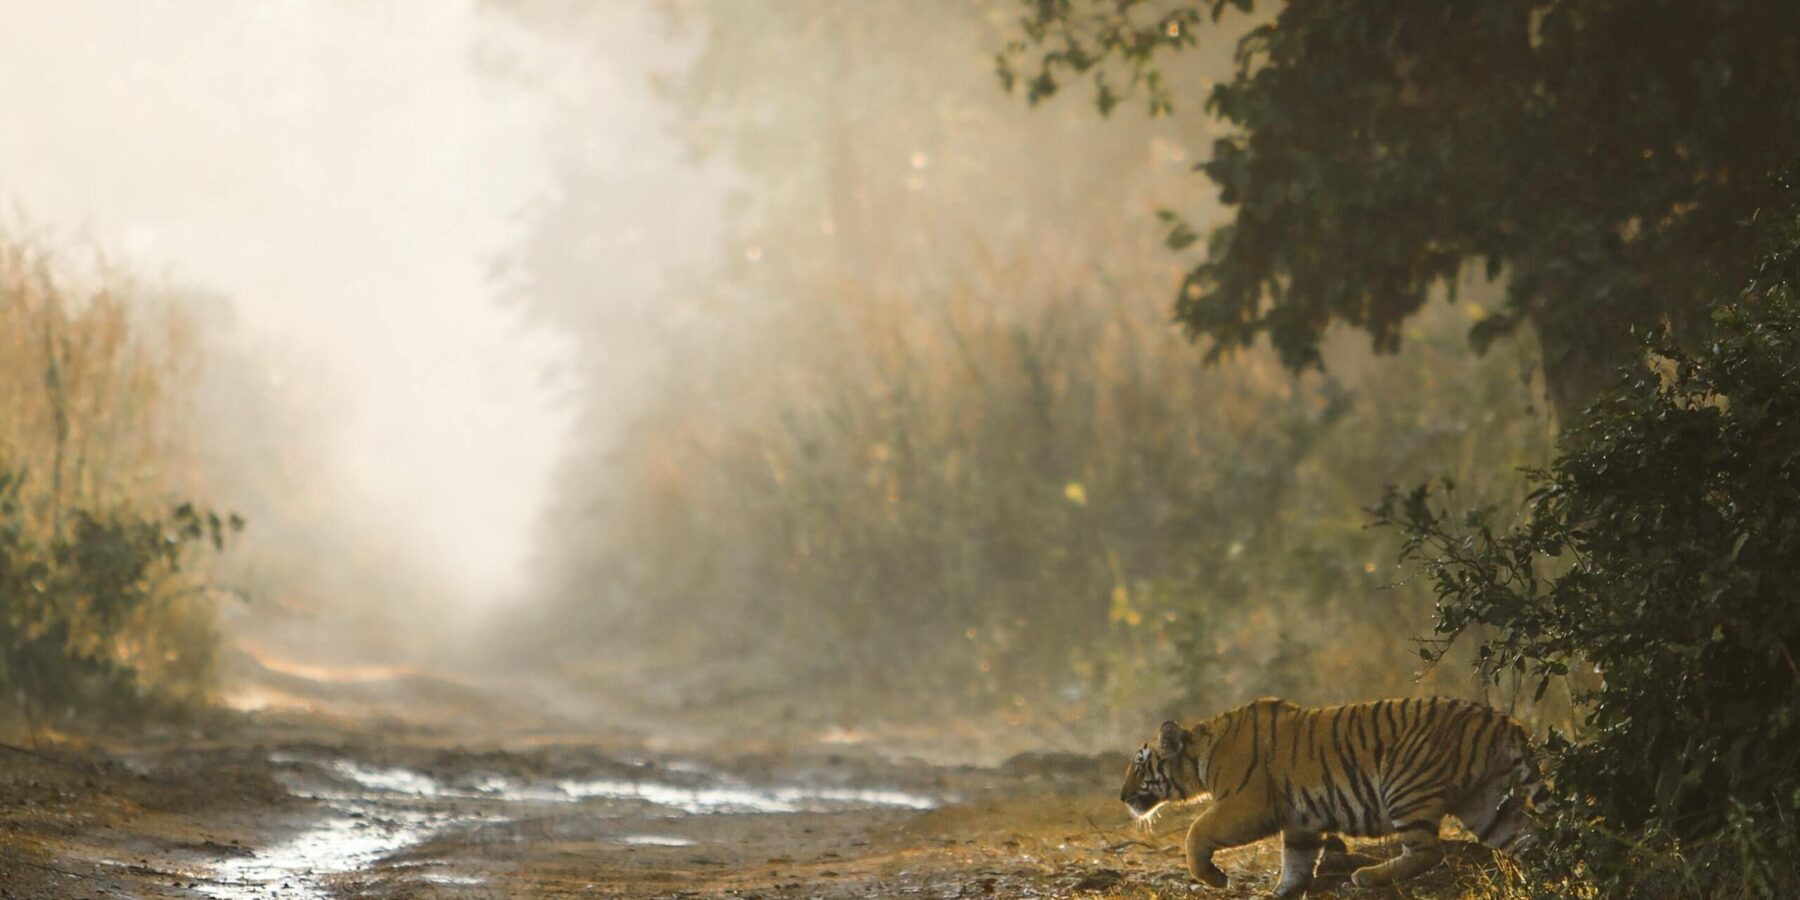 Tiger in India national park